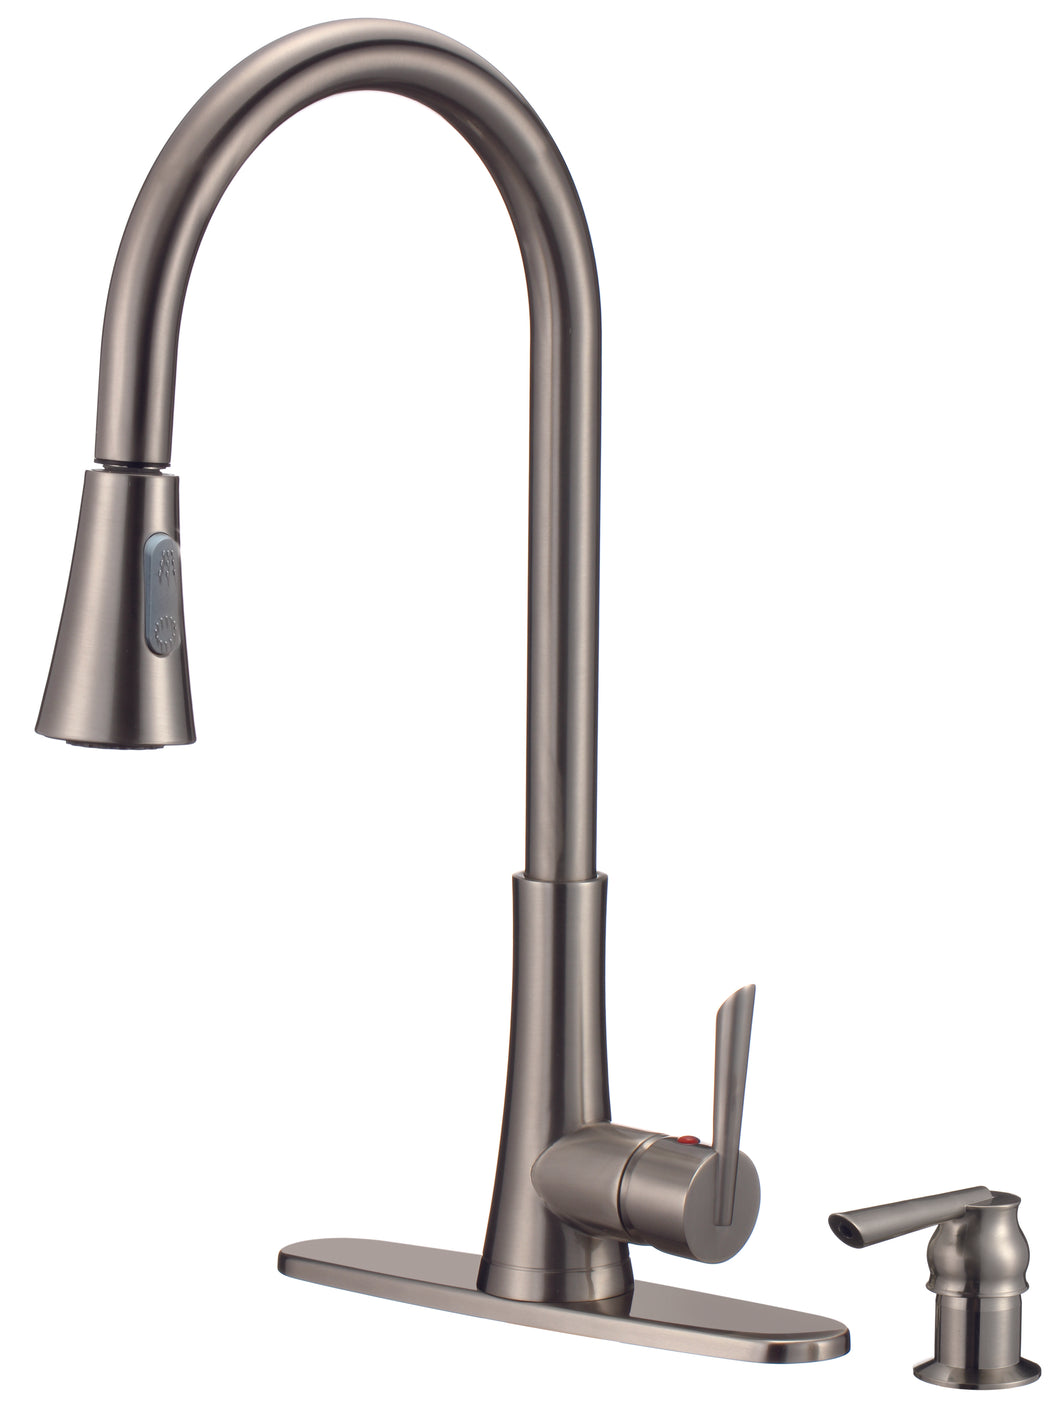 Pull Out Kitchen Faucet with Soap Dispenser & Deck Plate Combo #KF-82H18